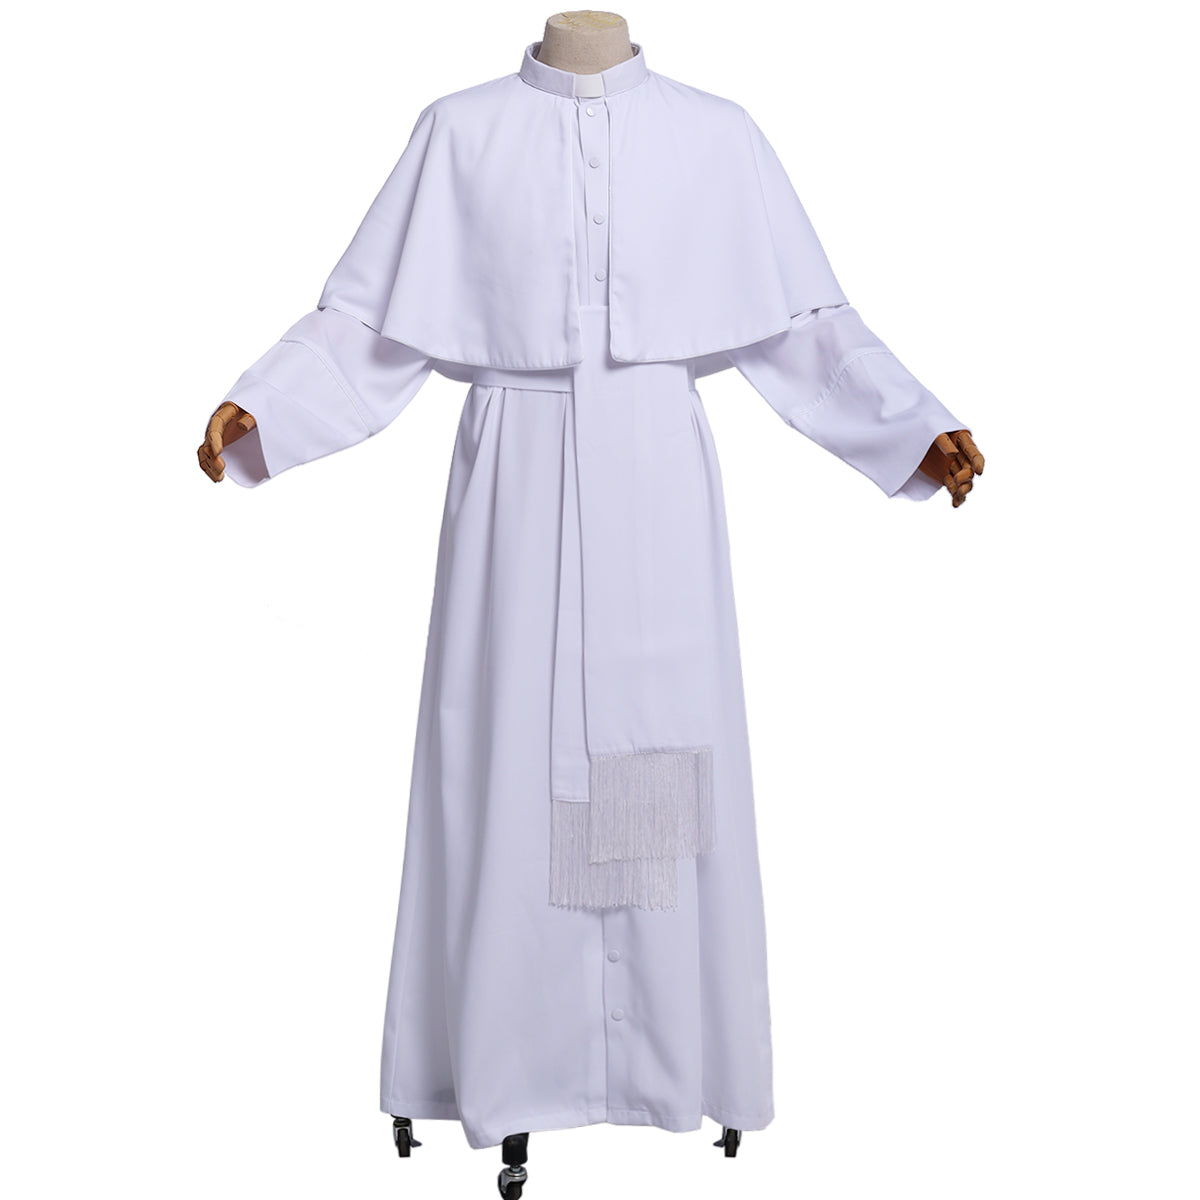 Clergy Men Cassock Priest Costume Bishop Roman Catholic Church Soutane Pope Pastor Father Mass Missionary Robes Outfit